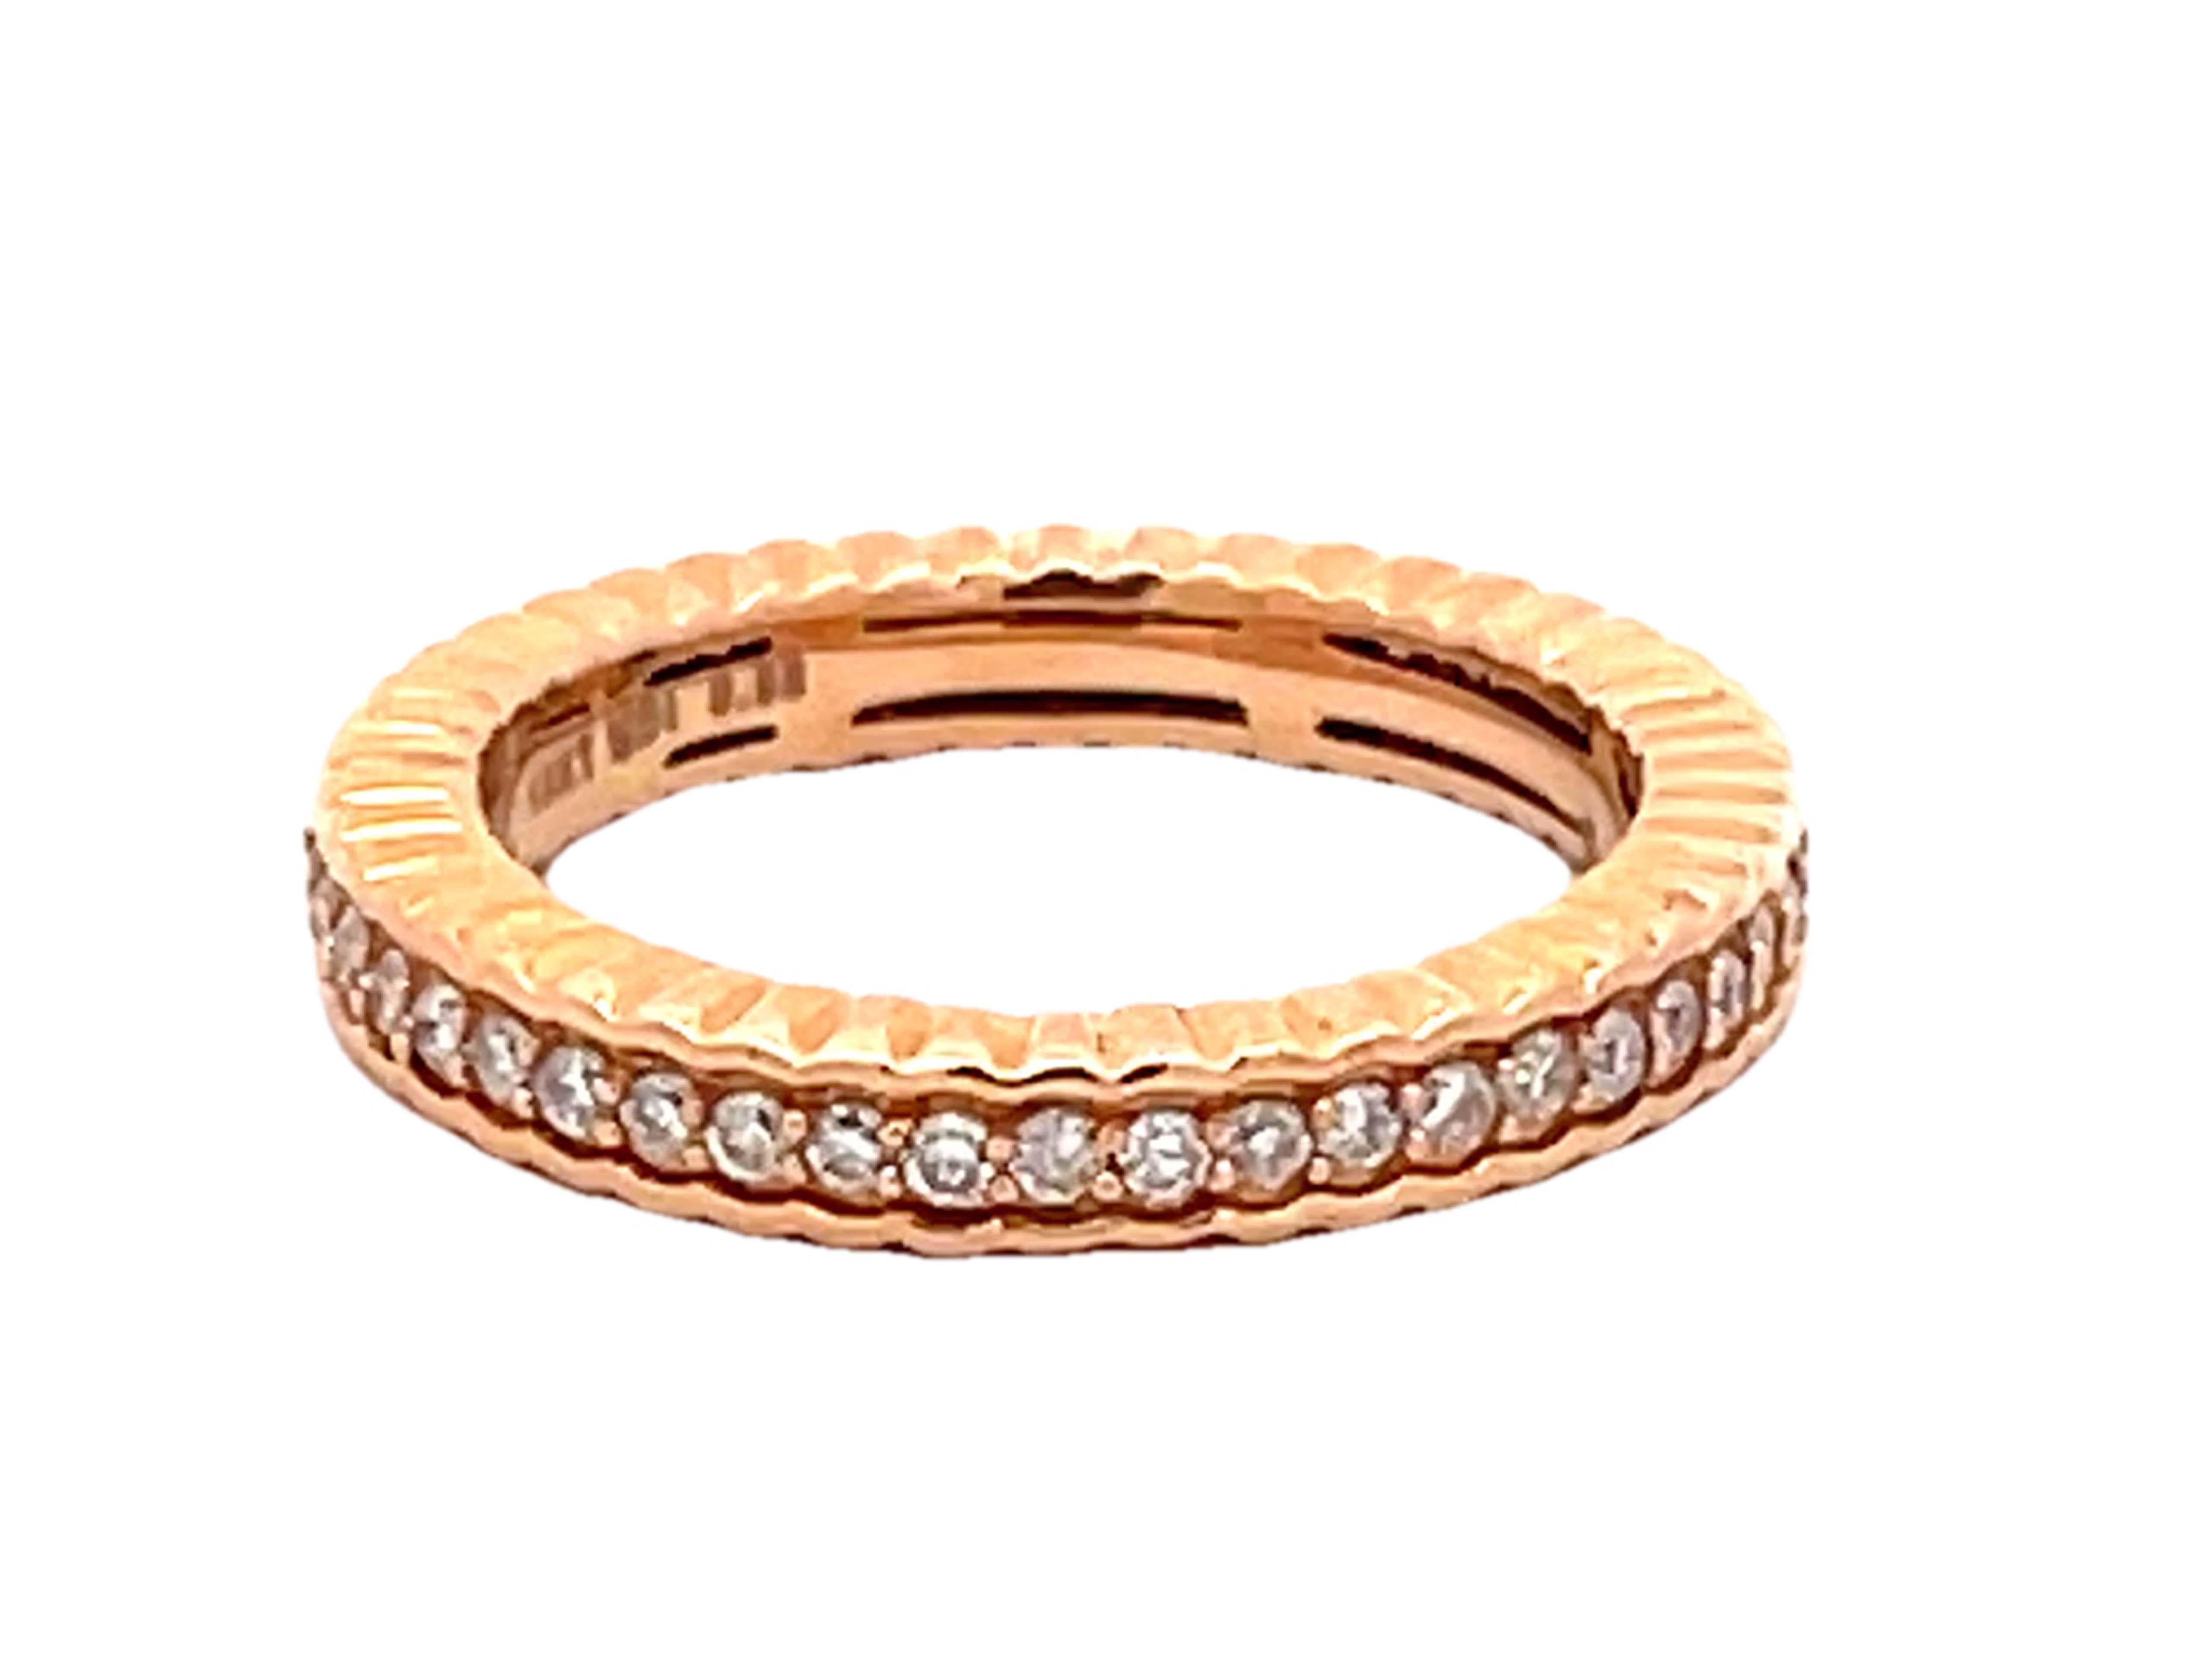 Brilliant Cut Eternity Band Diamond Ring Solid 18k Rose Gold For Sale